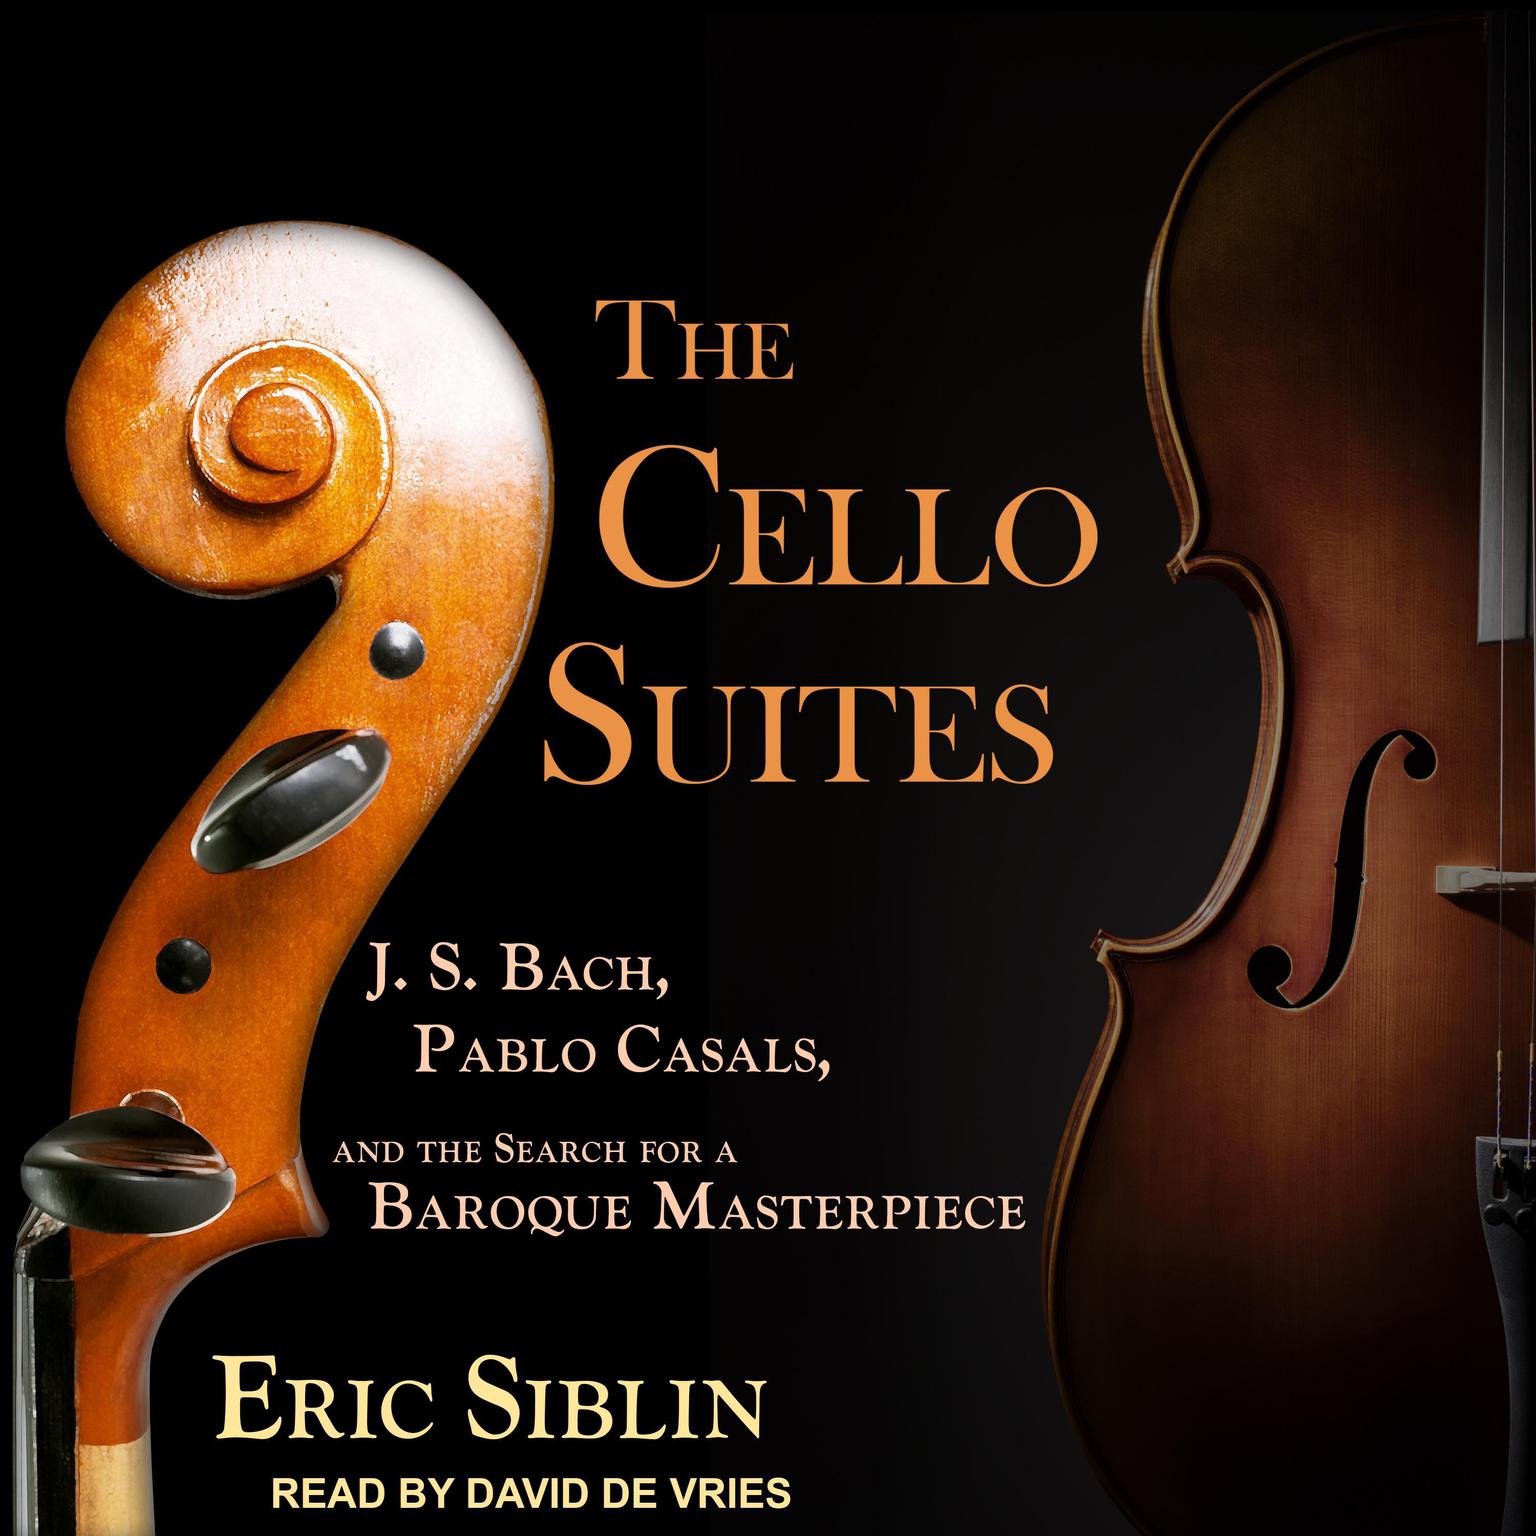 The Cello Suites: J. S. Bach, Pablo Casals, and the Search for a Baroque Masterpiece Audiobook, by Eric Siblin